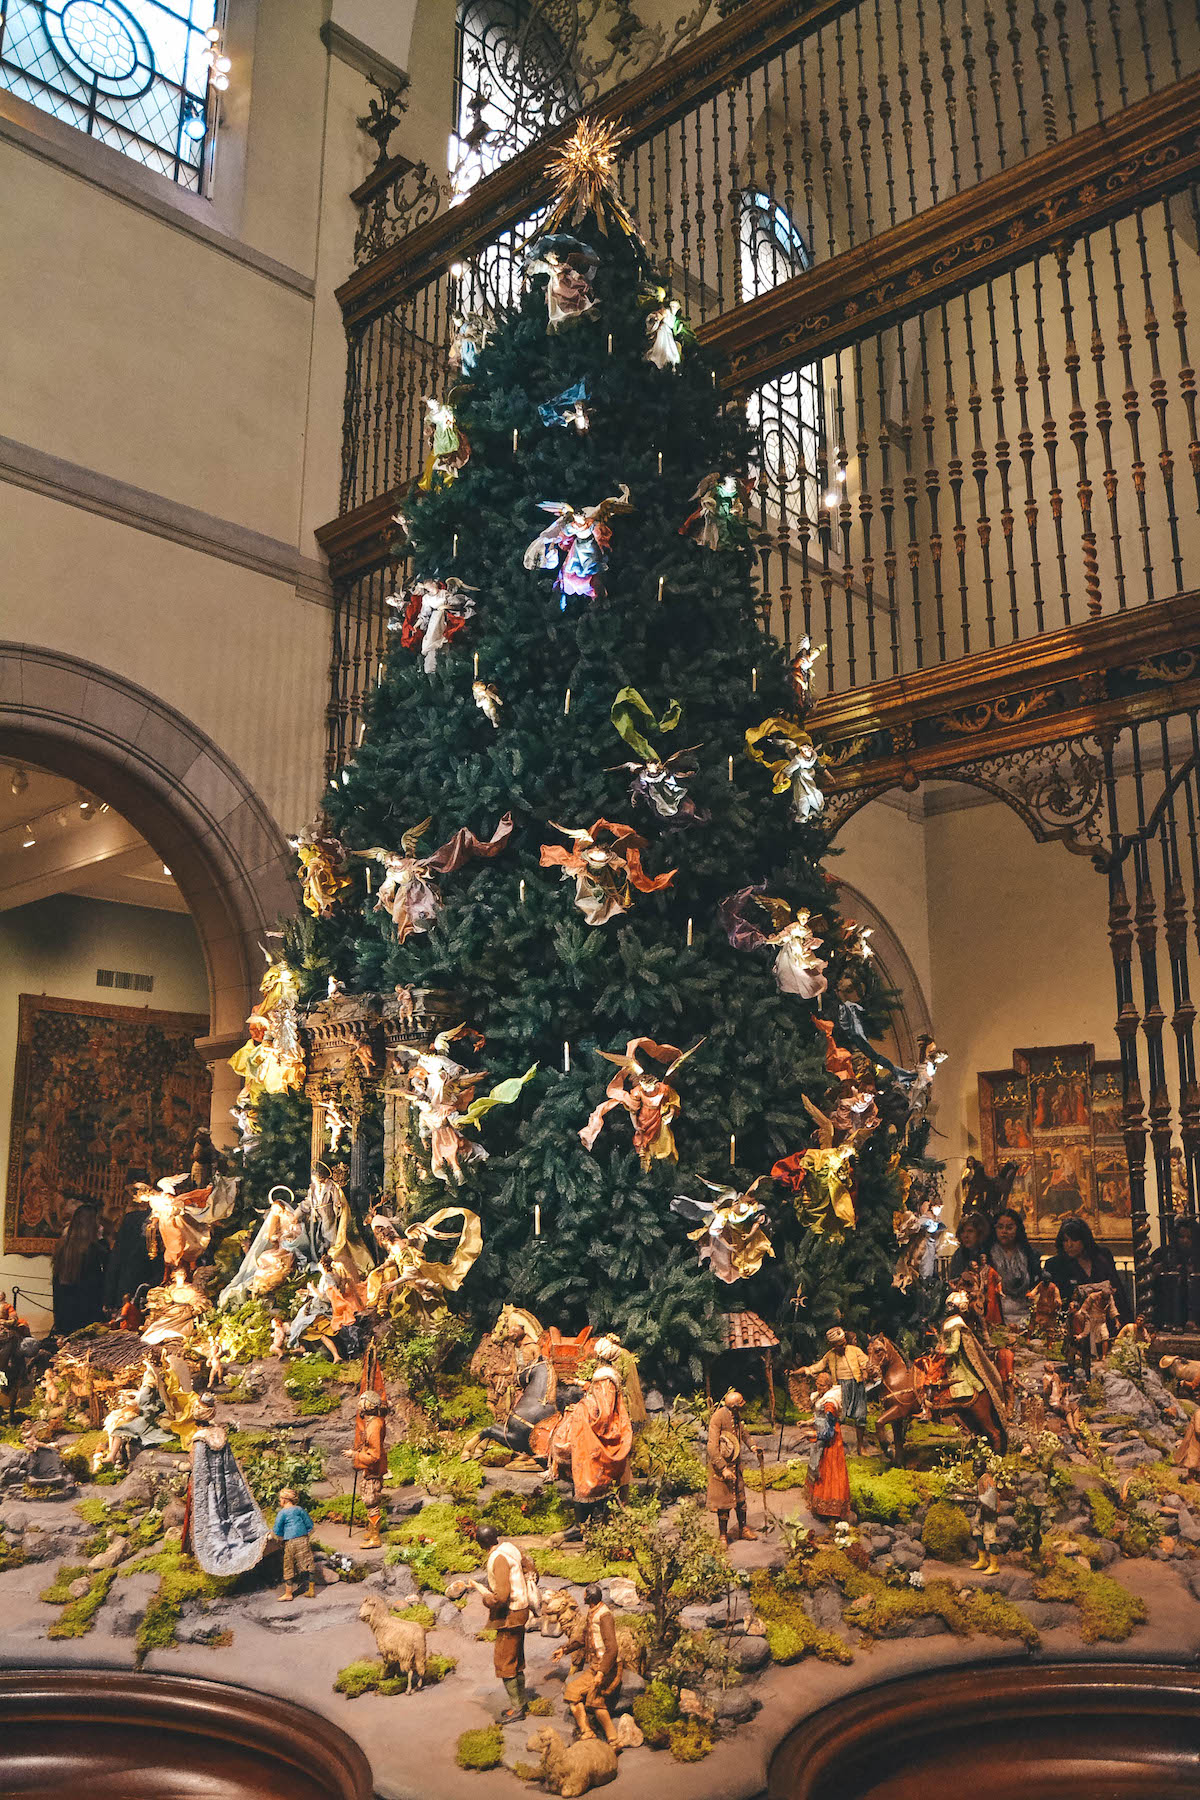 The nativity Christmas Tree inside the Met Museum in NYC.